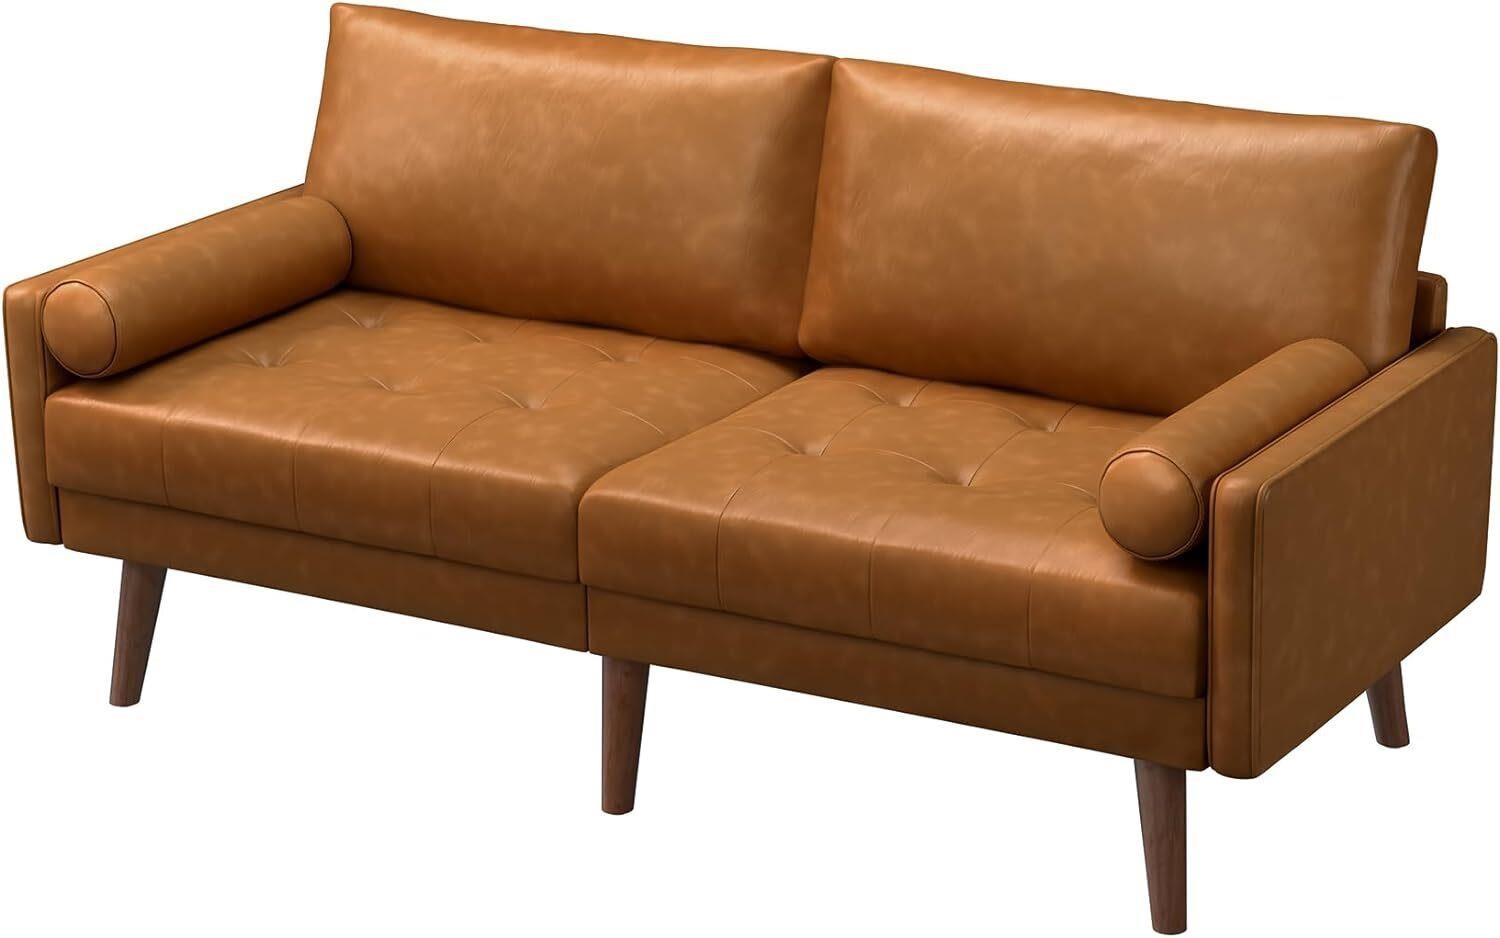 Vesgantti 2 Seater Couch  71in Faux Leather